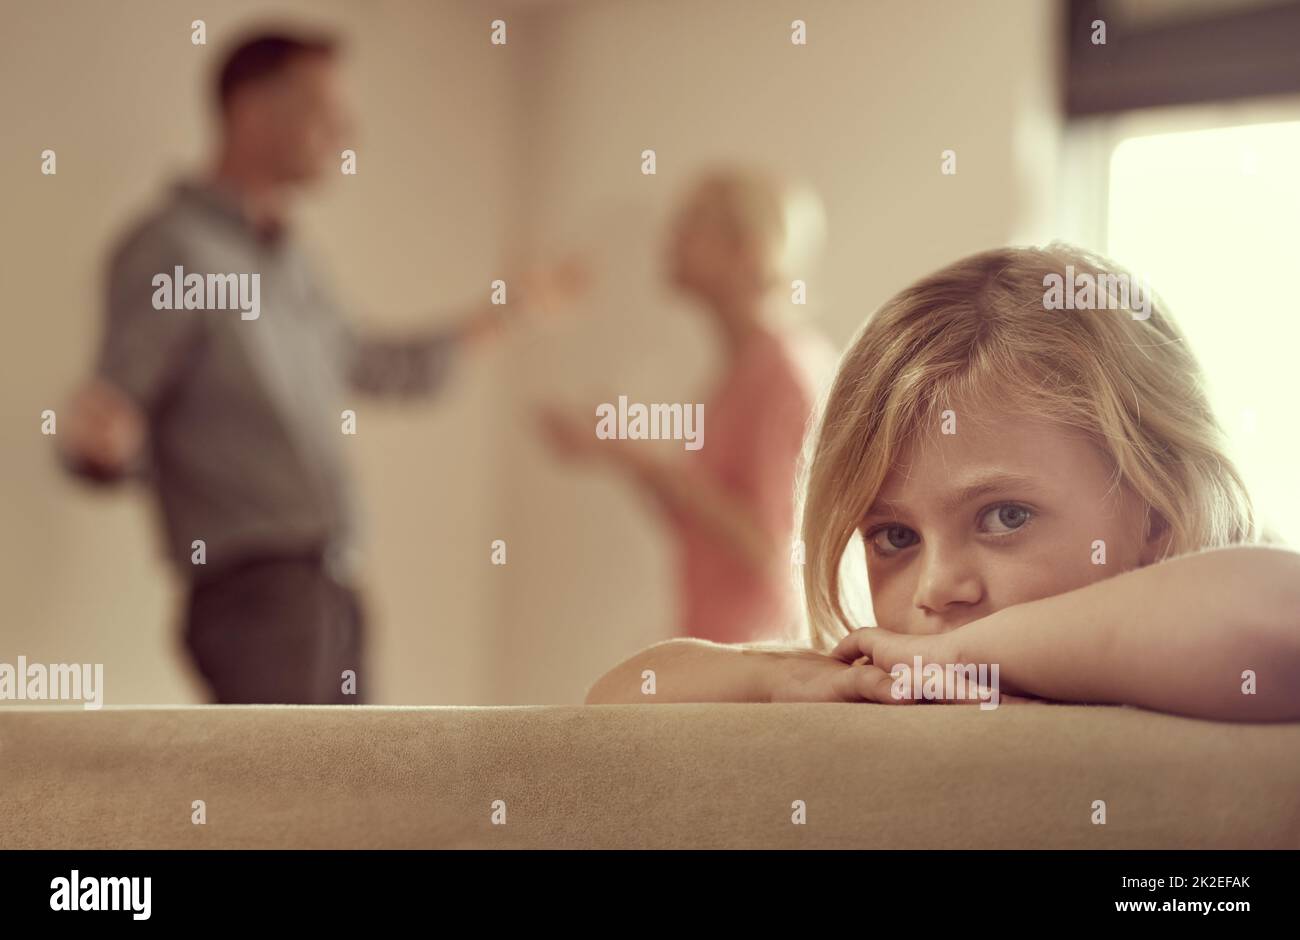 Why do they have to fight. Shot of a little girl looking unhappy as her parents argue in the background. Stock Photo